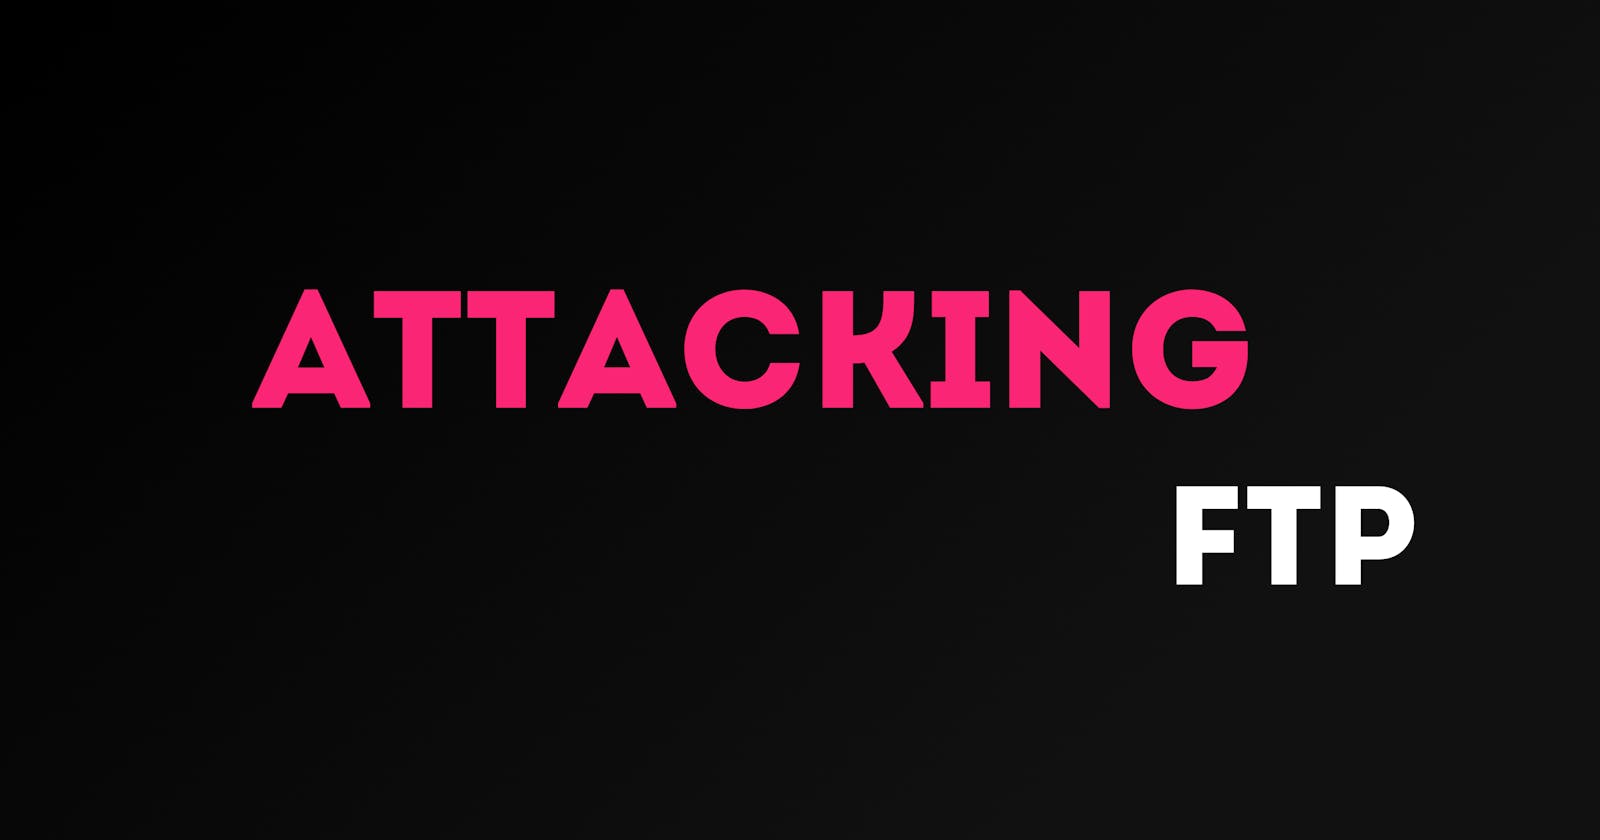 Attacking Network Services - FTP